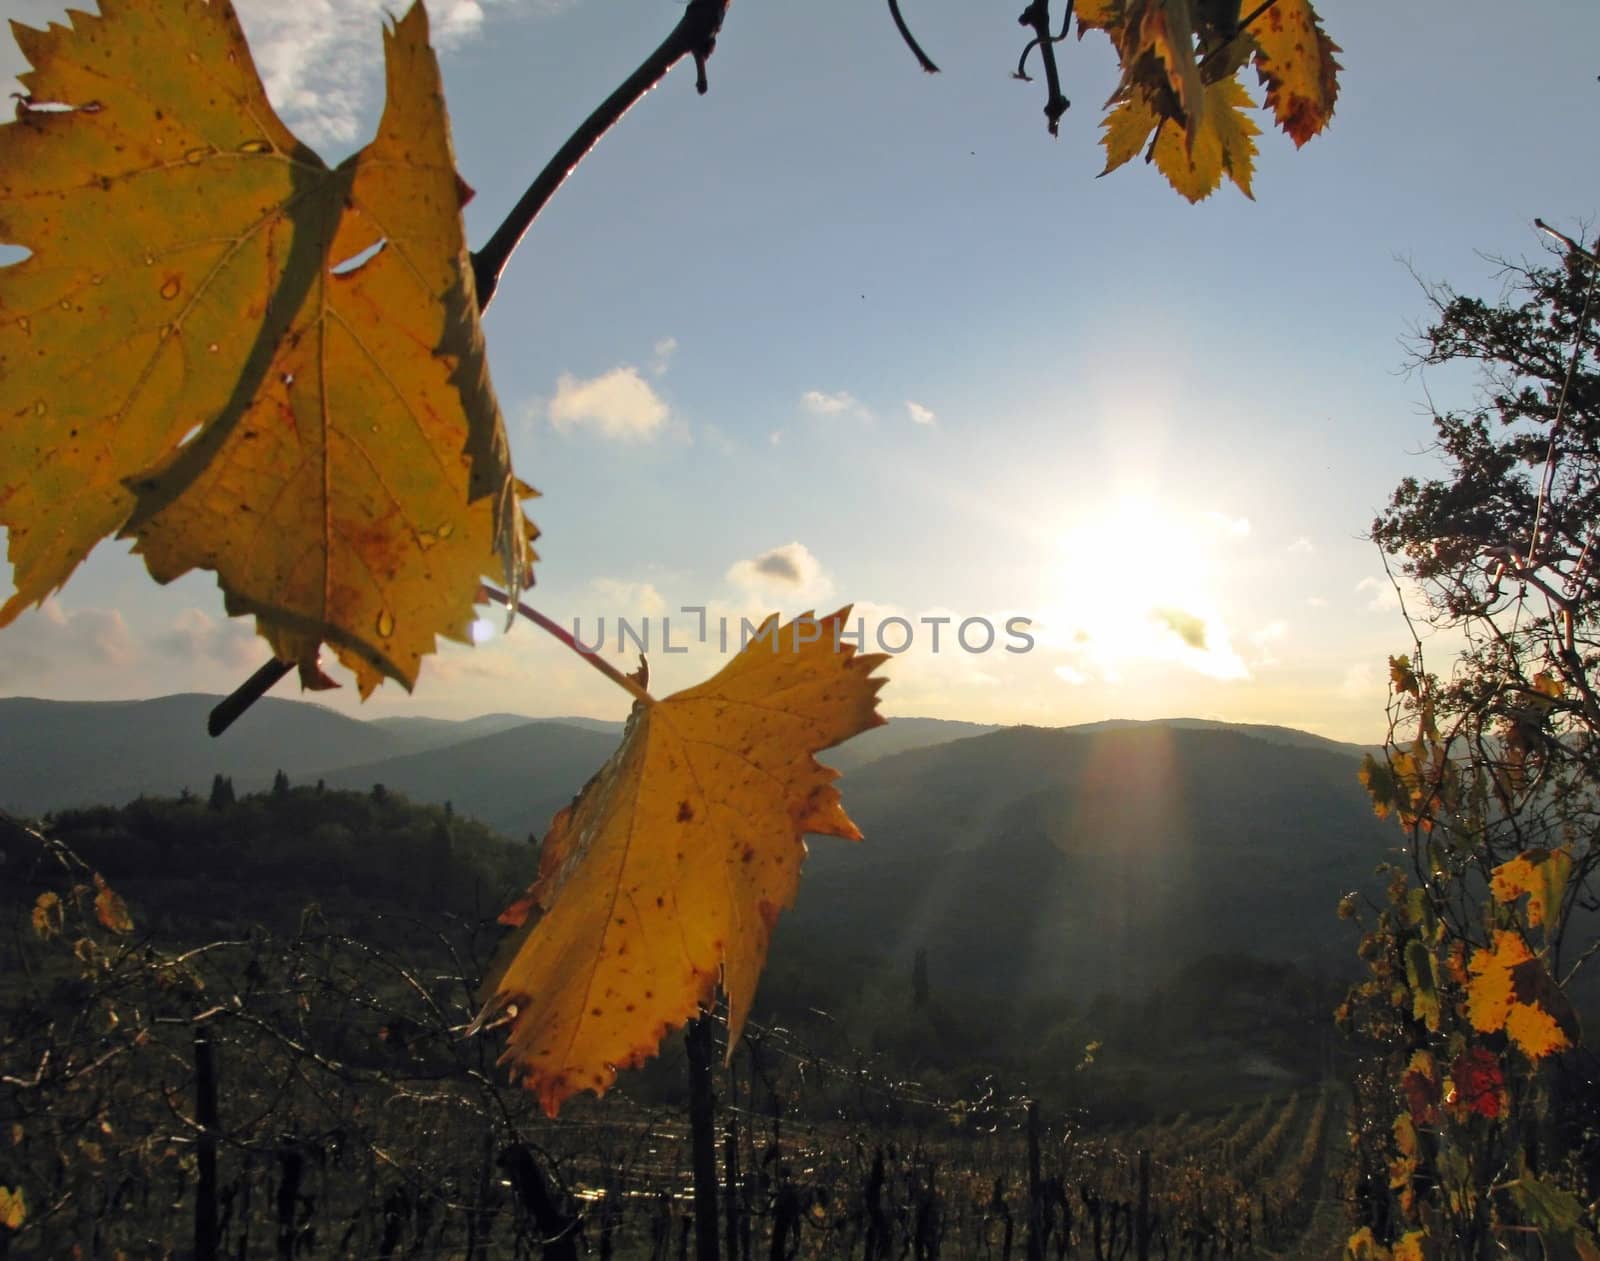 Closeup of a grapevine leaf and the morning sun rising over the hills of Tuscany Chianti in Italy.
